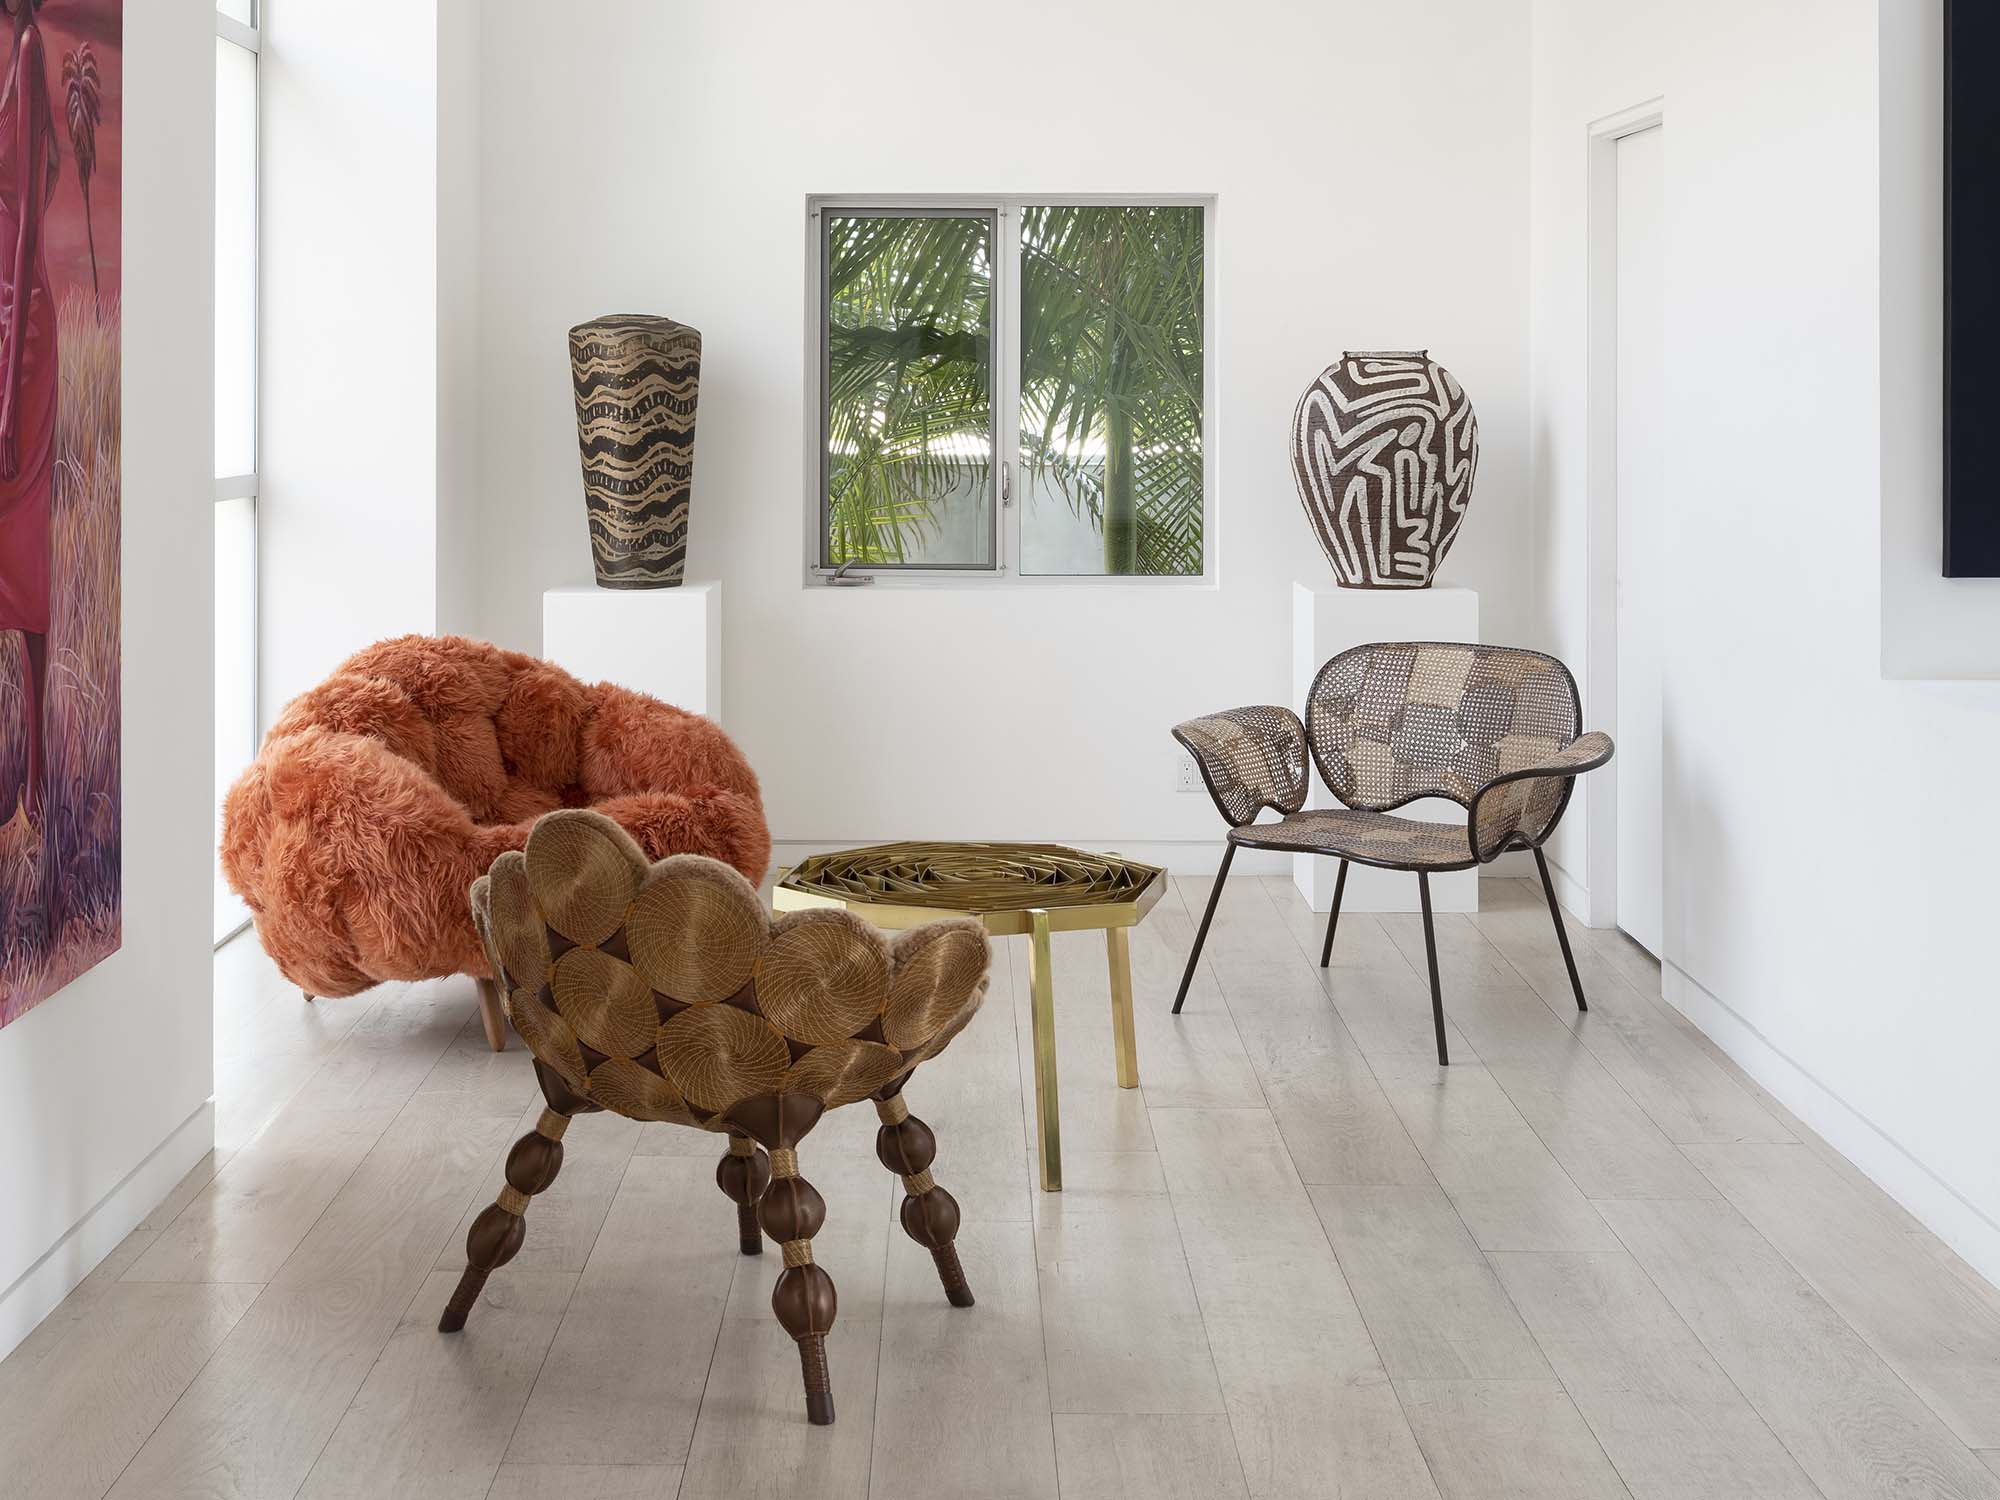 Made in Brazil: Curated by Campana Brothers